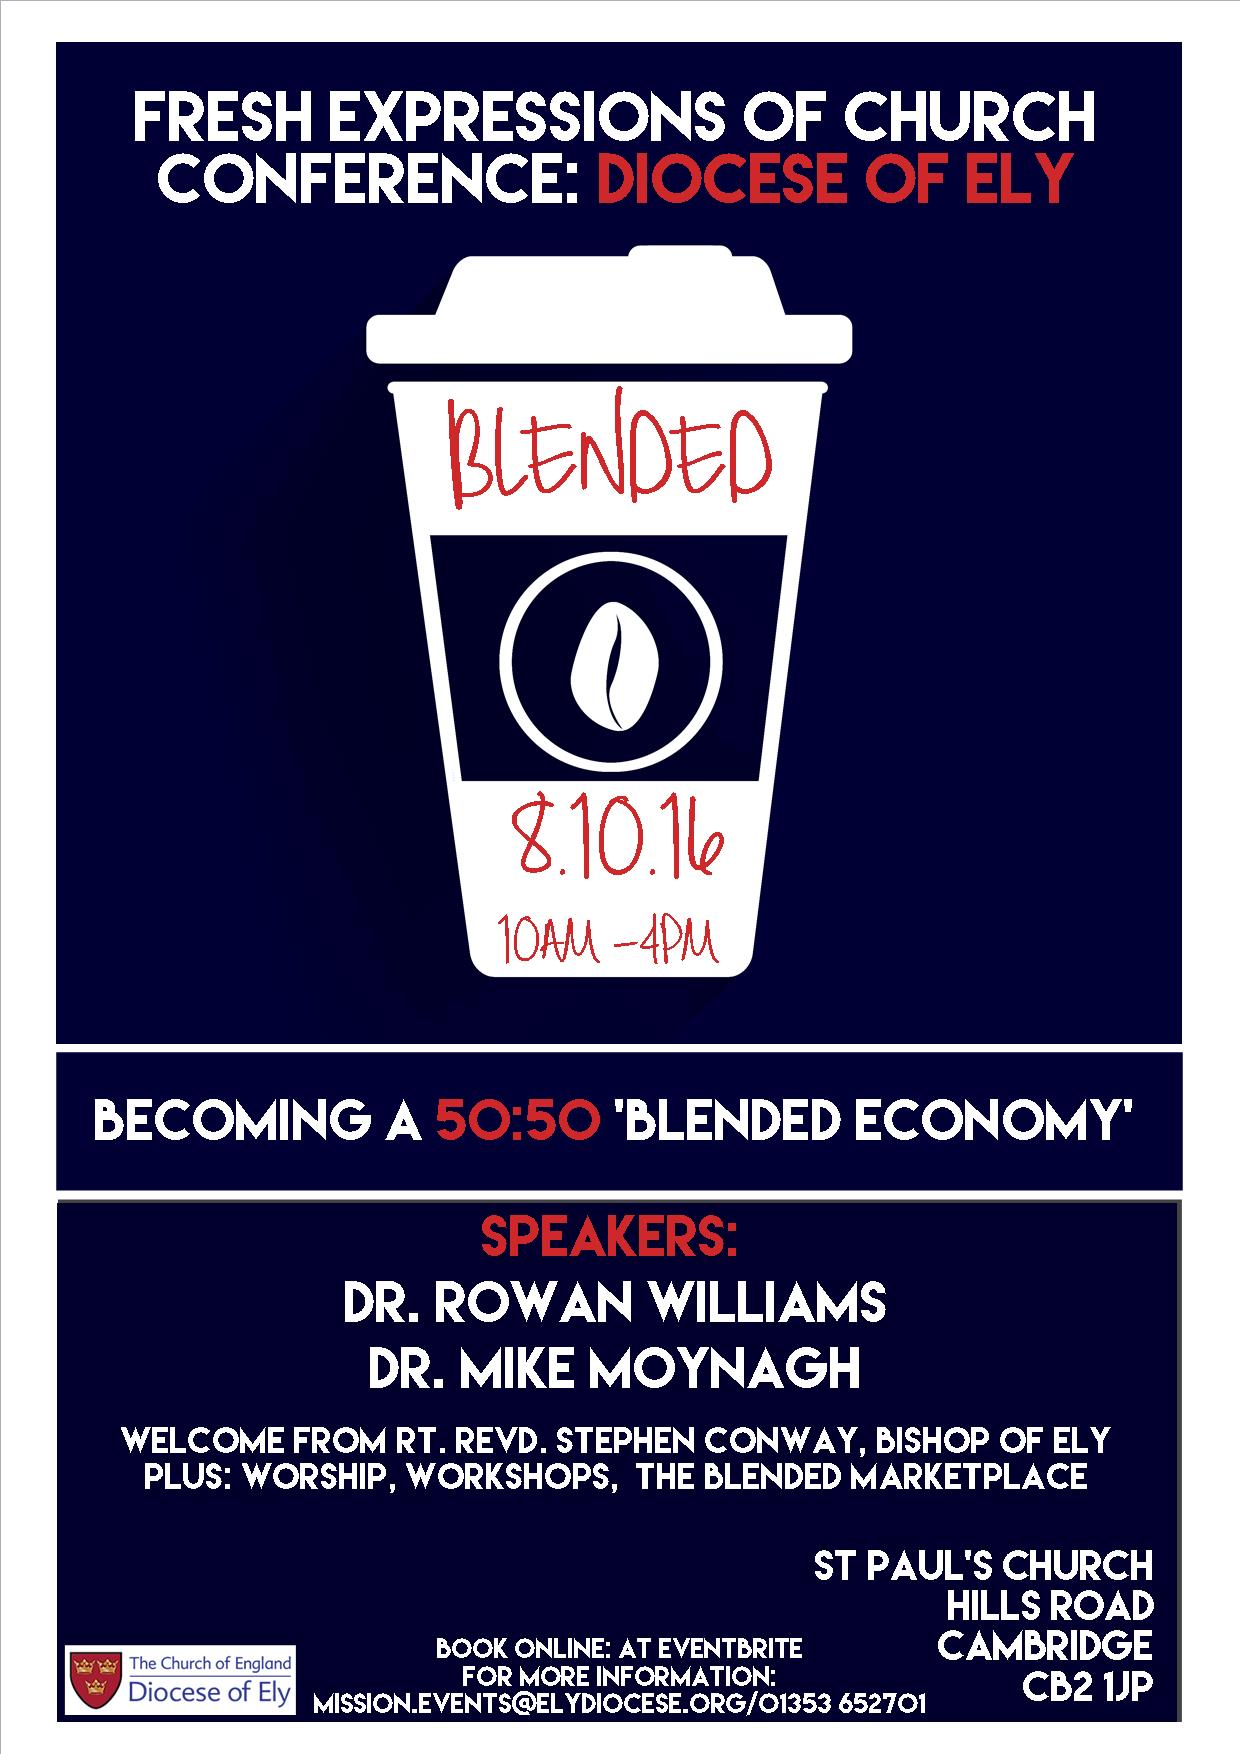 Blended: Diocese of Ely Fresh Expressions of Church Conference